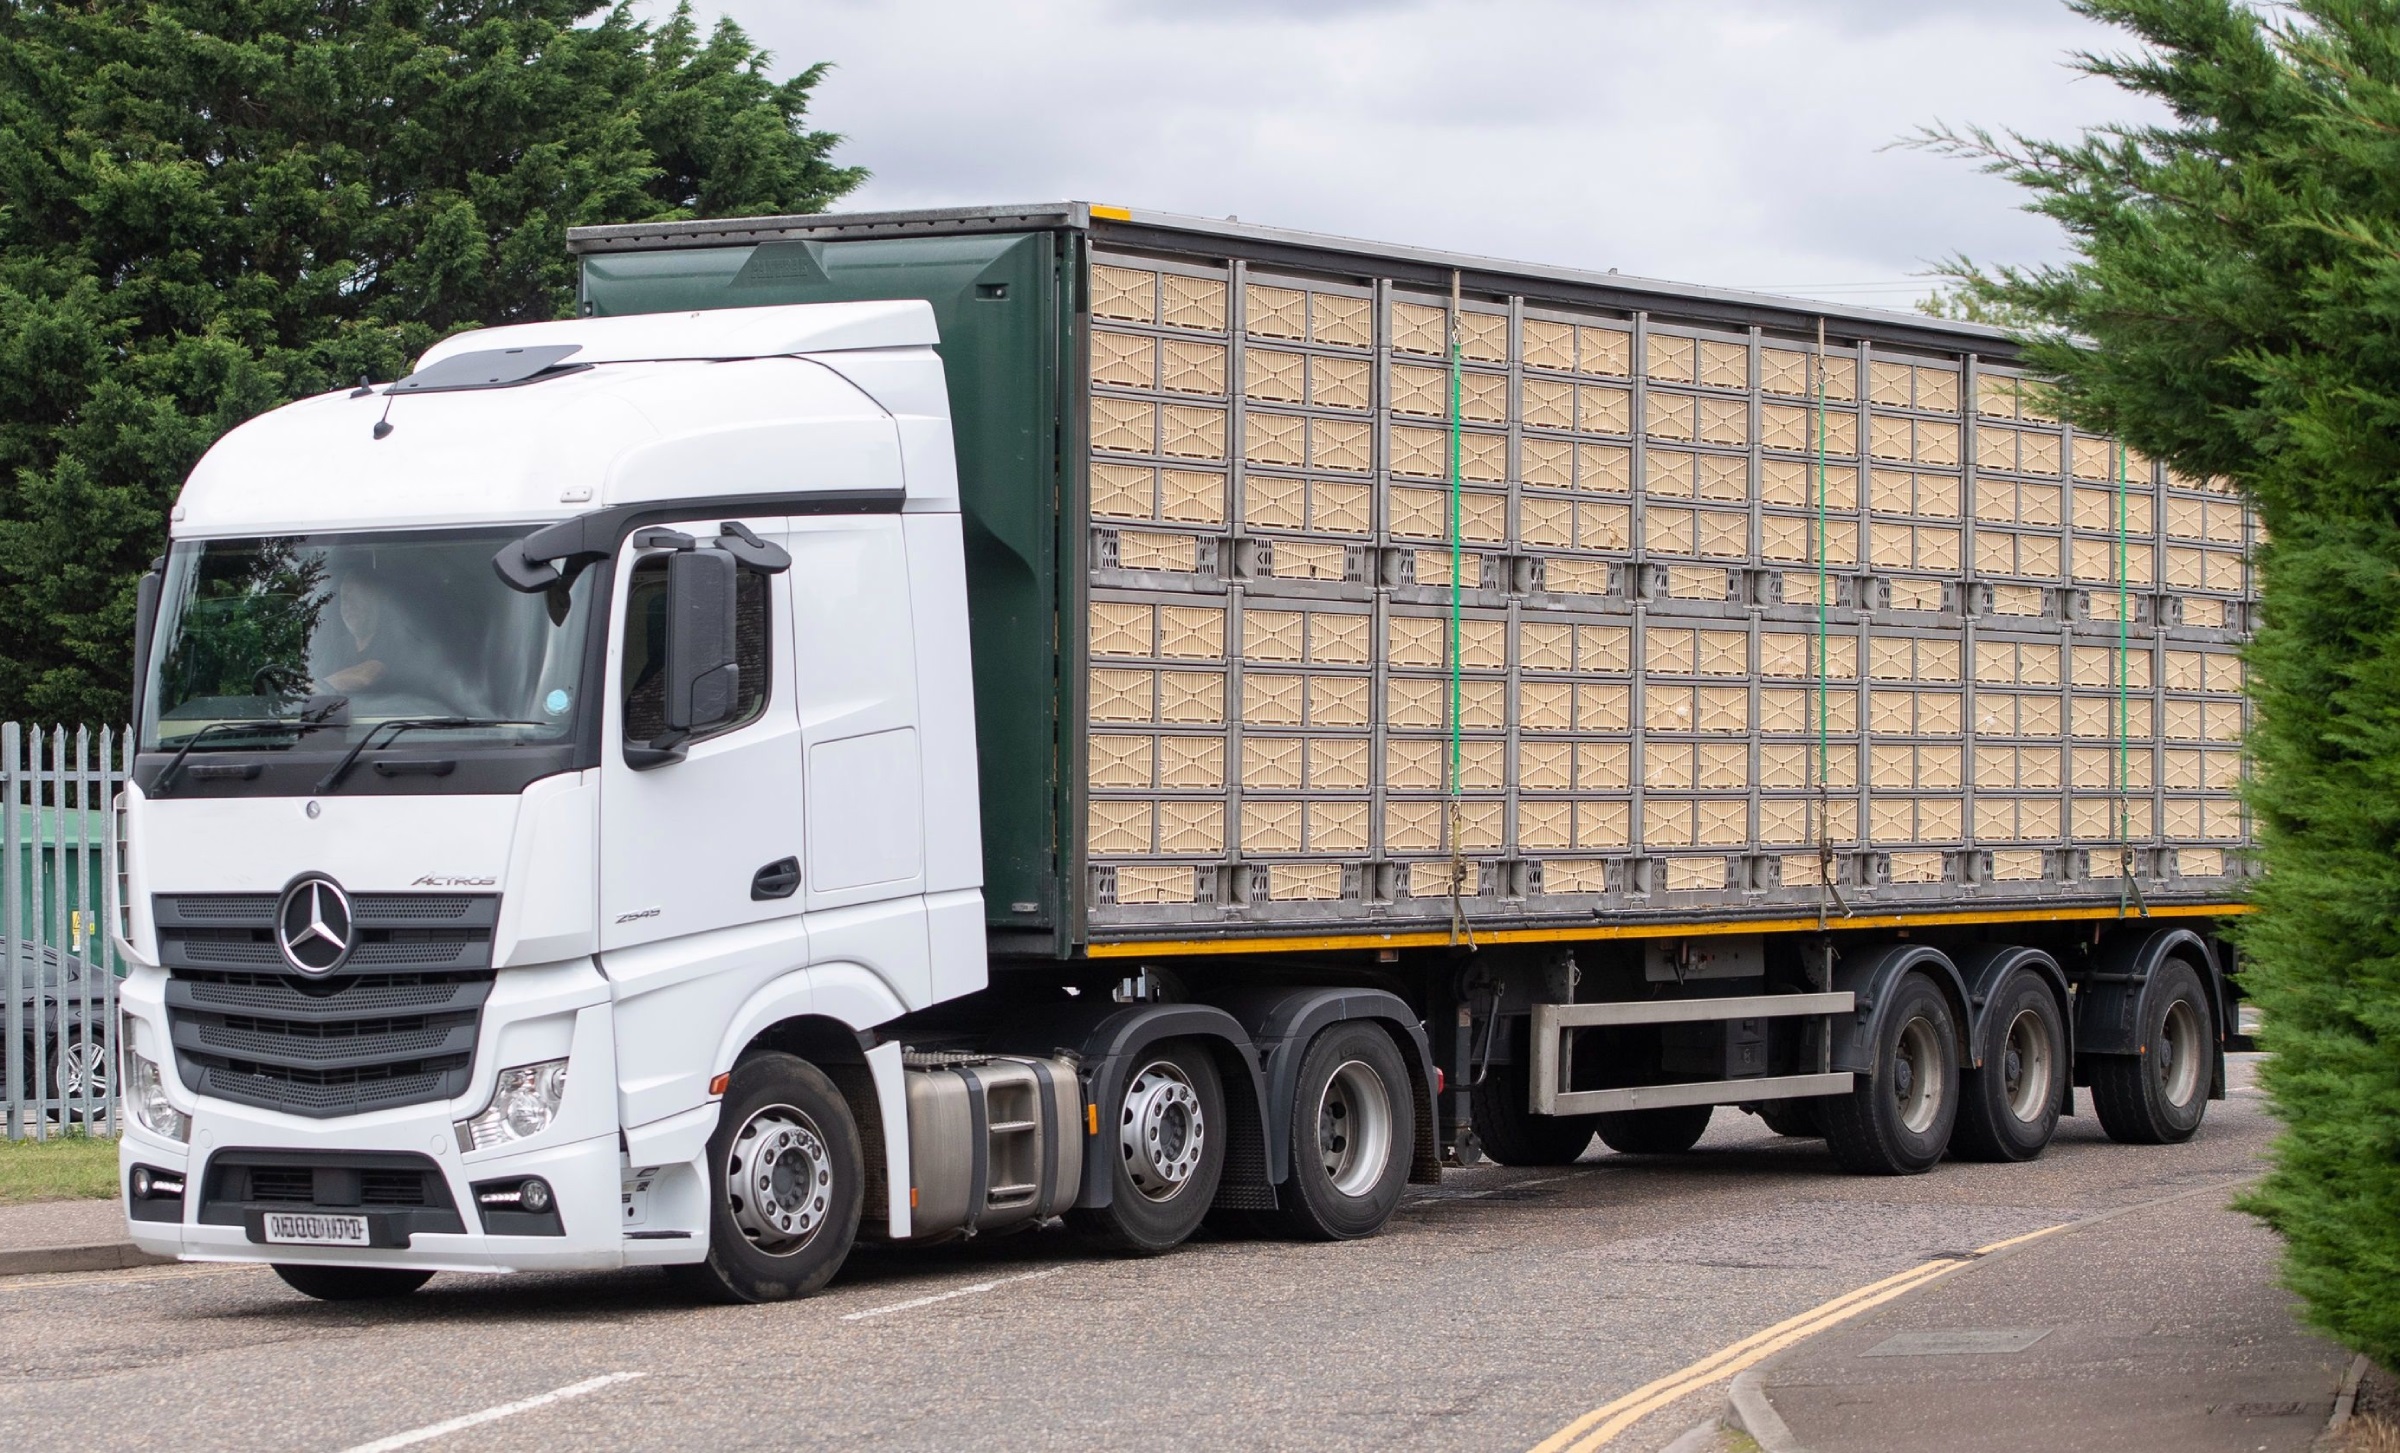 A smooth transport from grower to processor